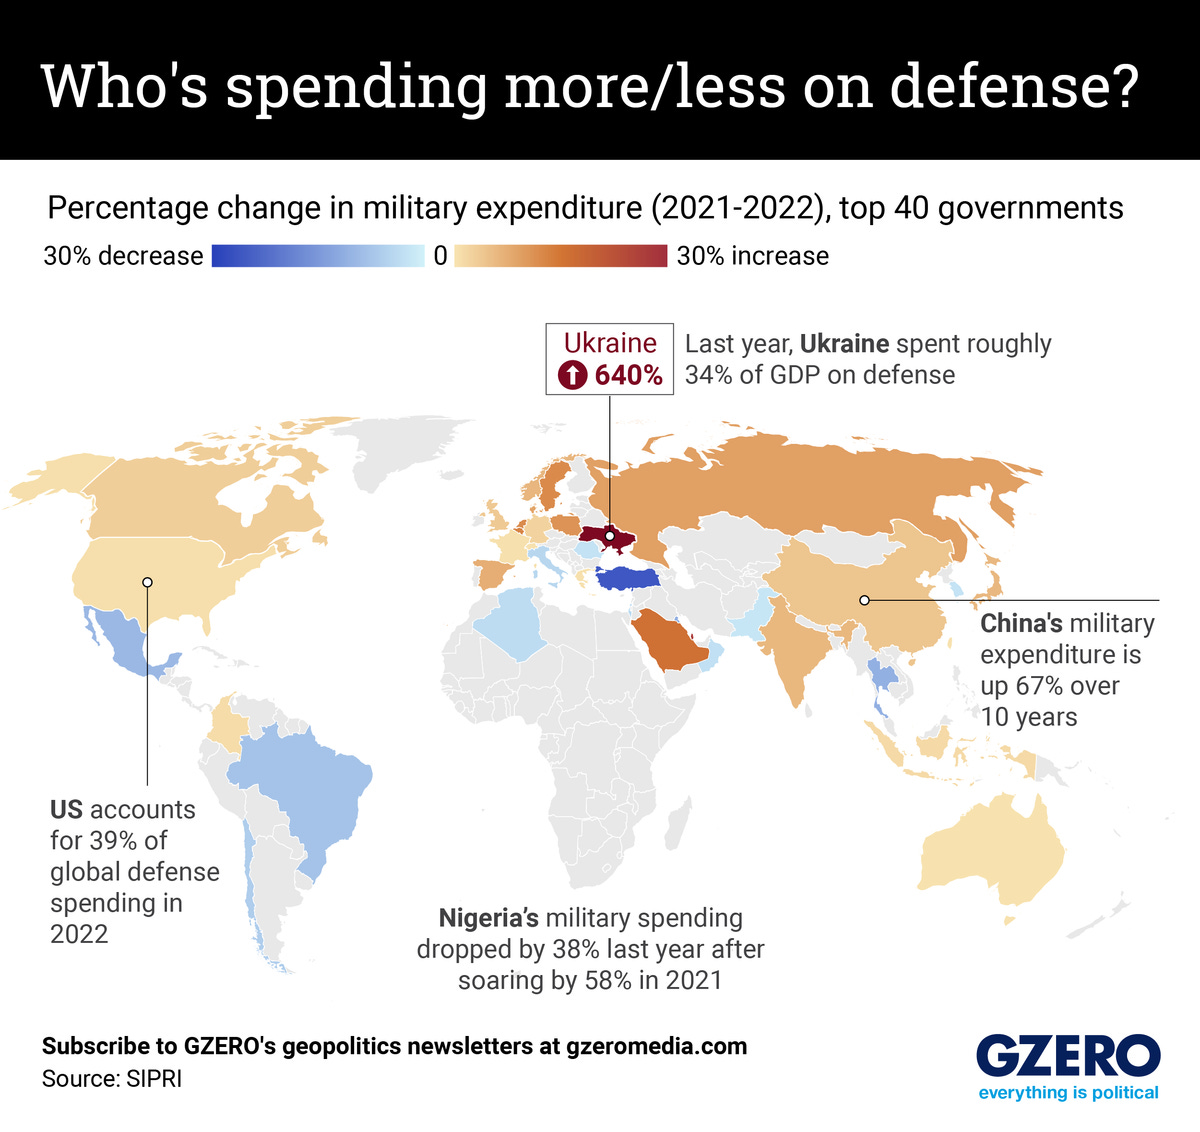 Heat map showing percentage change in military expenditure (2021-2022), top 40 governments